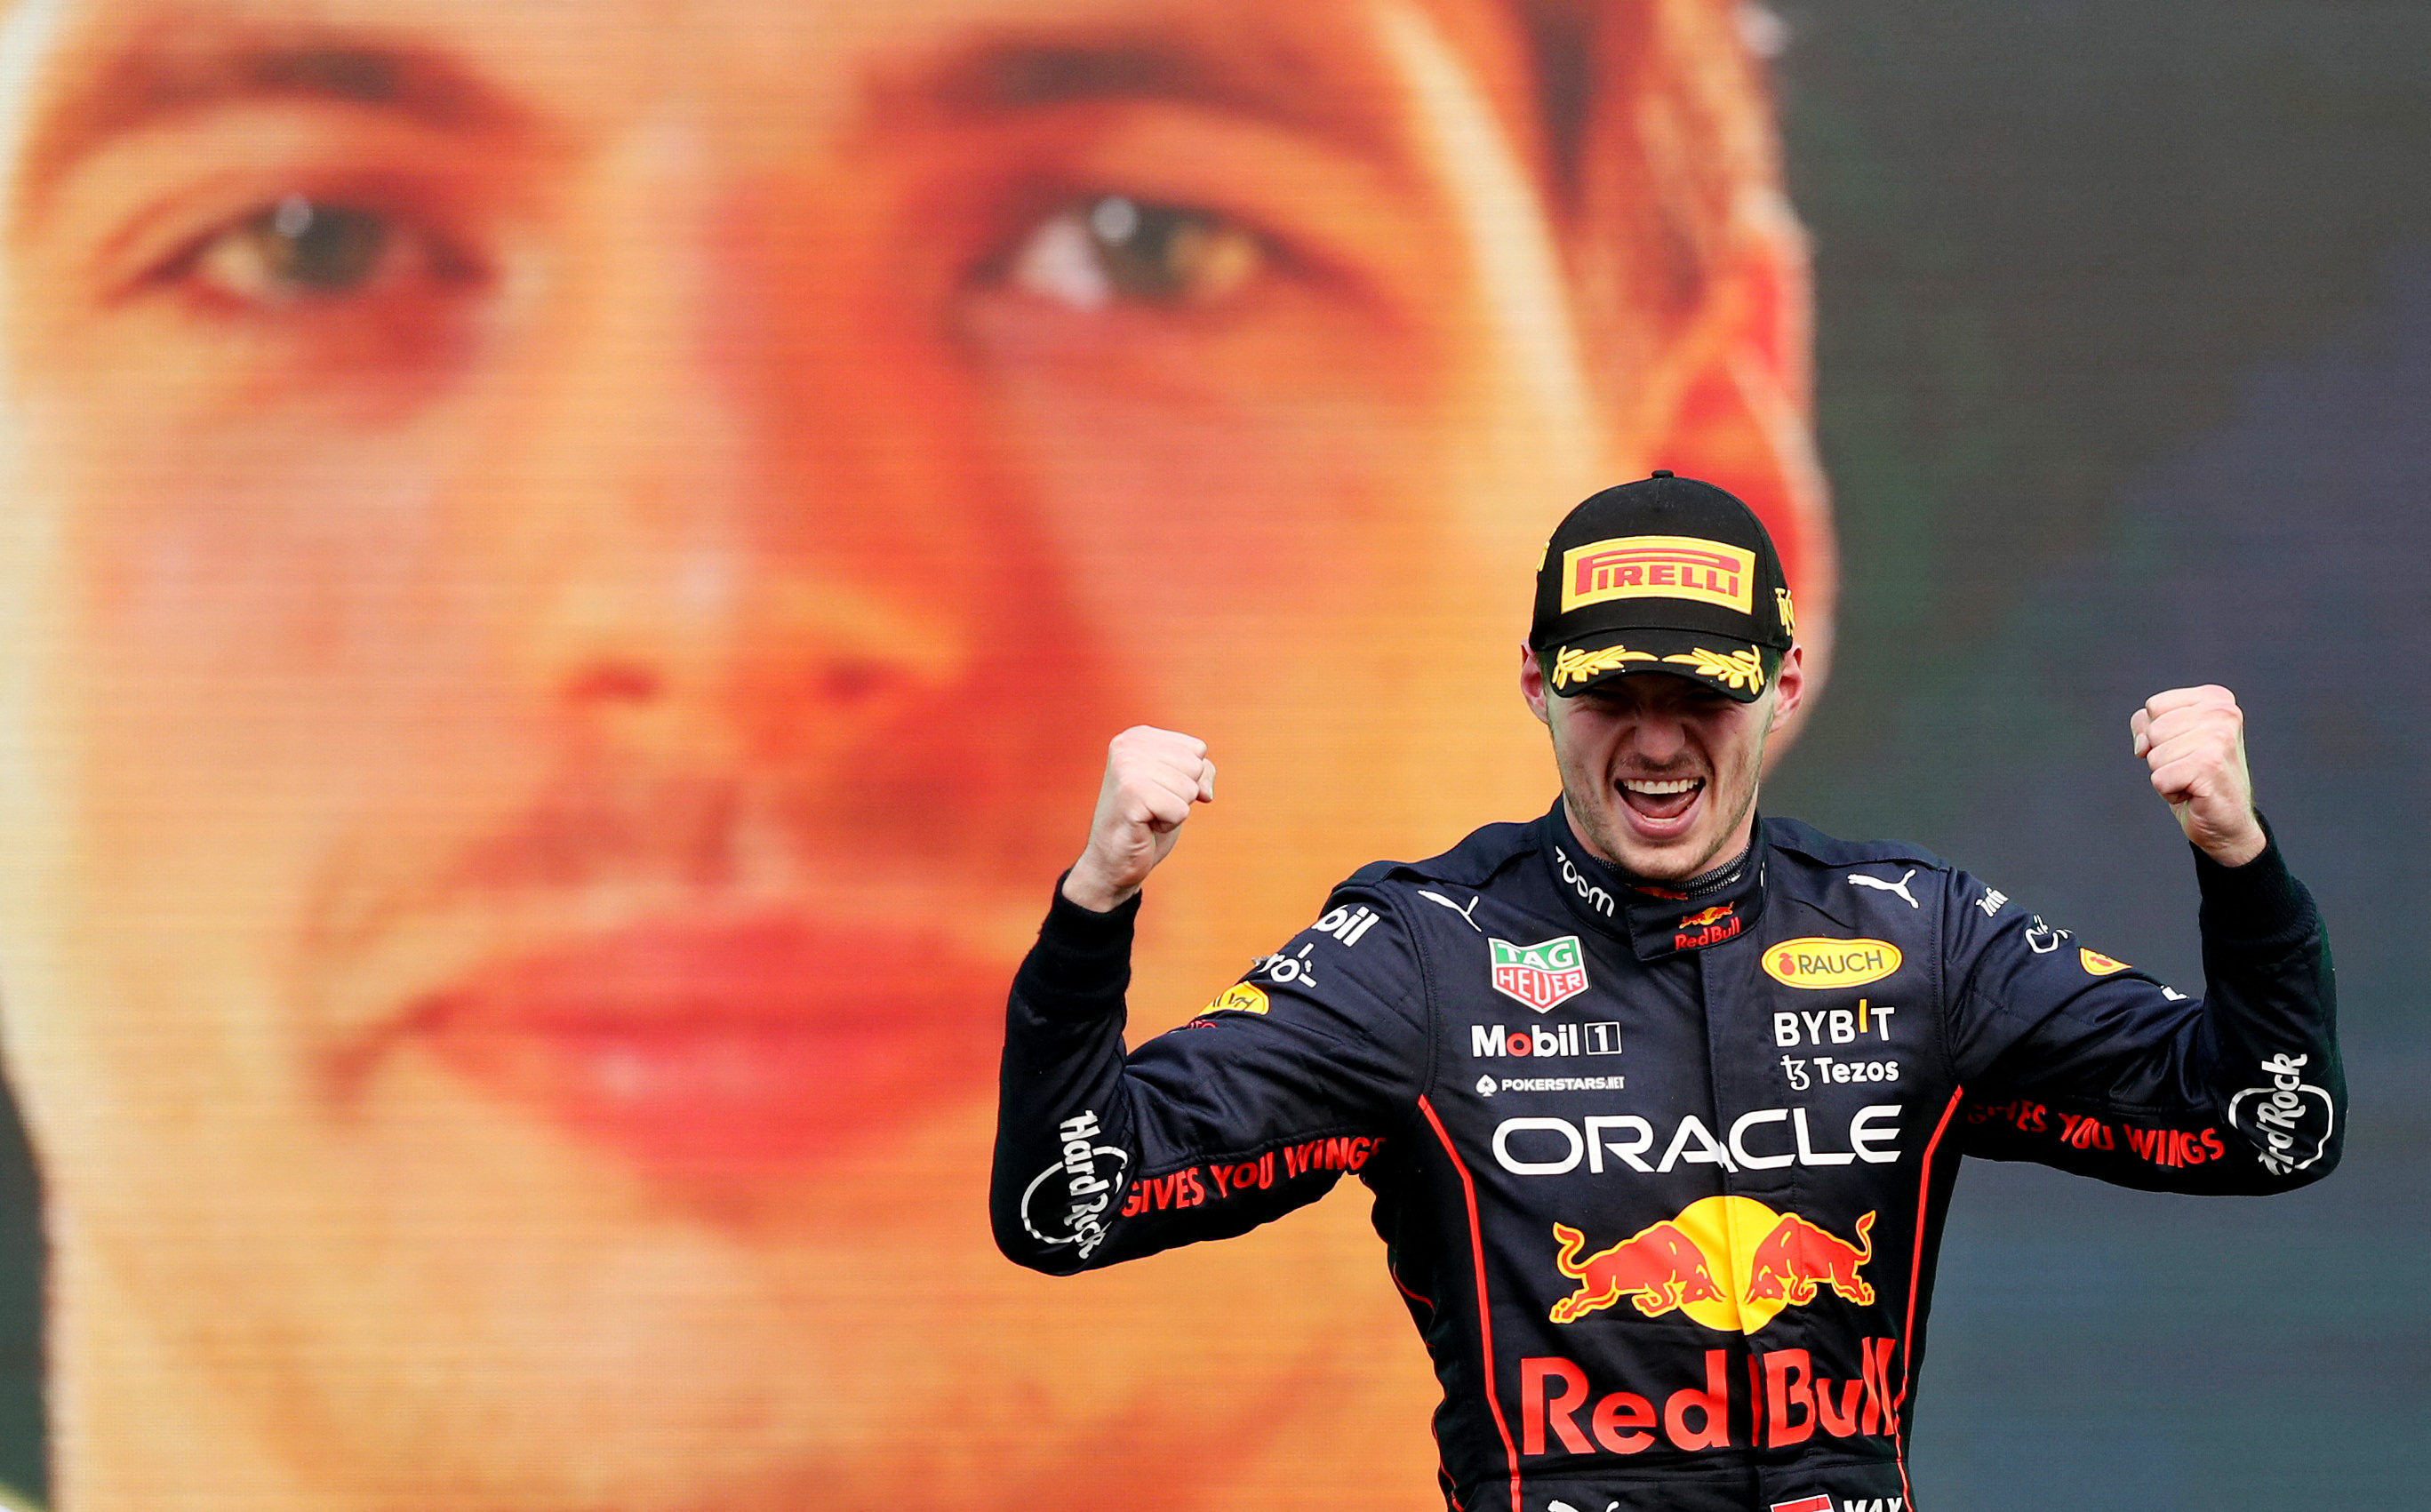 Max Verstappen celebrates after setting a new F1 record of 14 grand prix wins in a season. Photo: Reuters